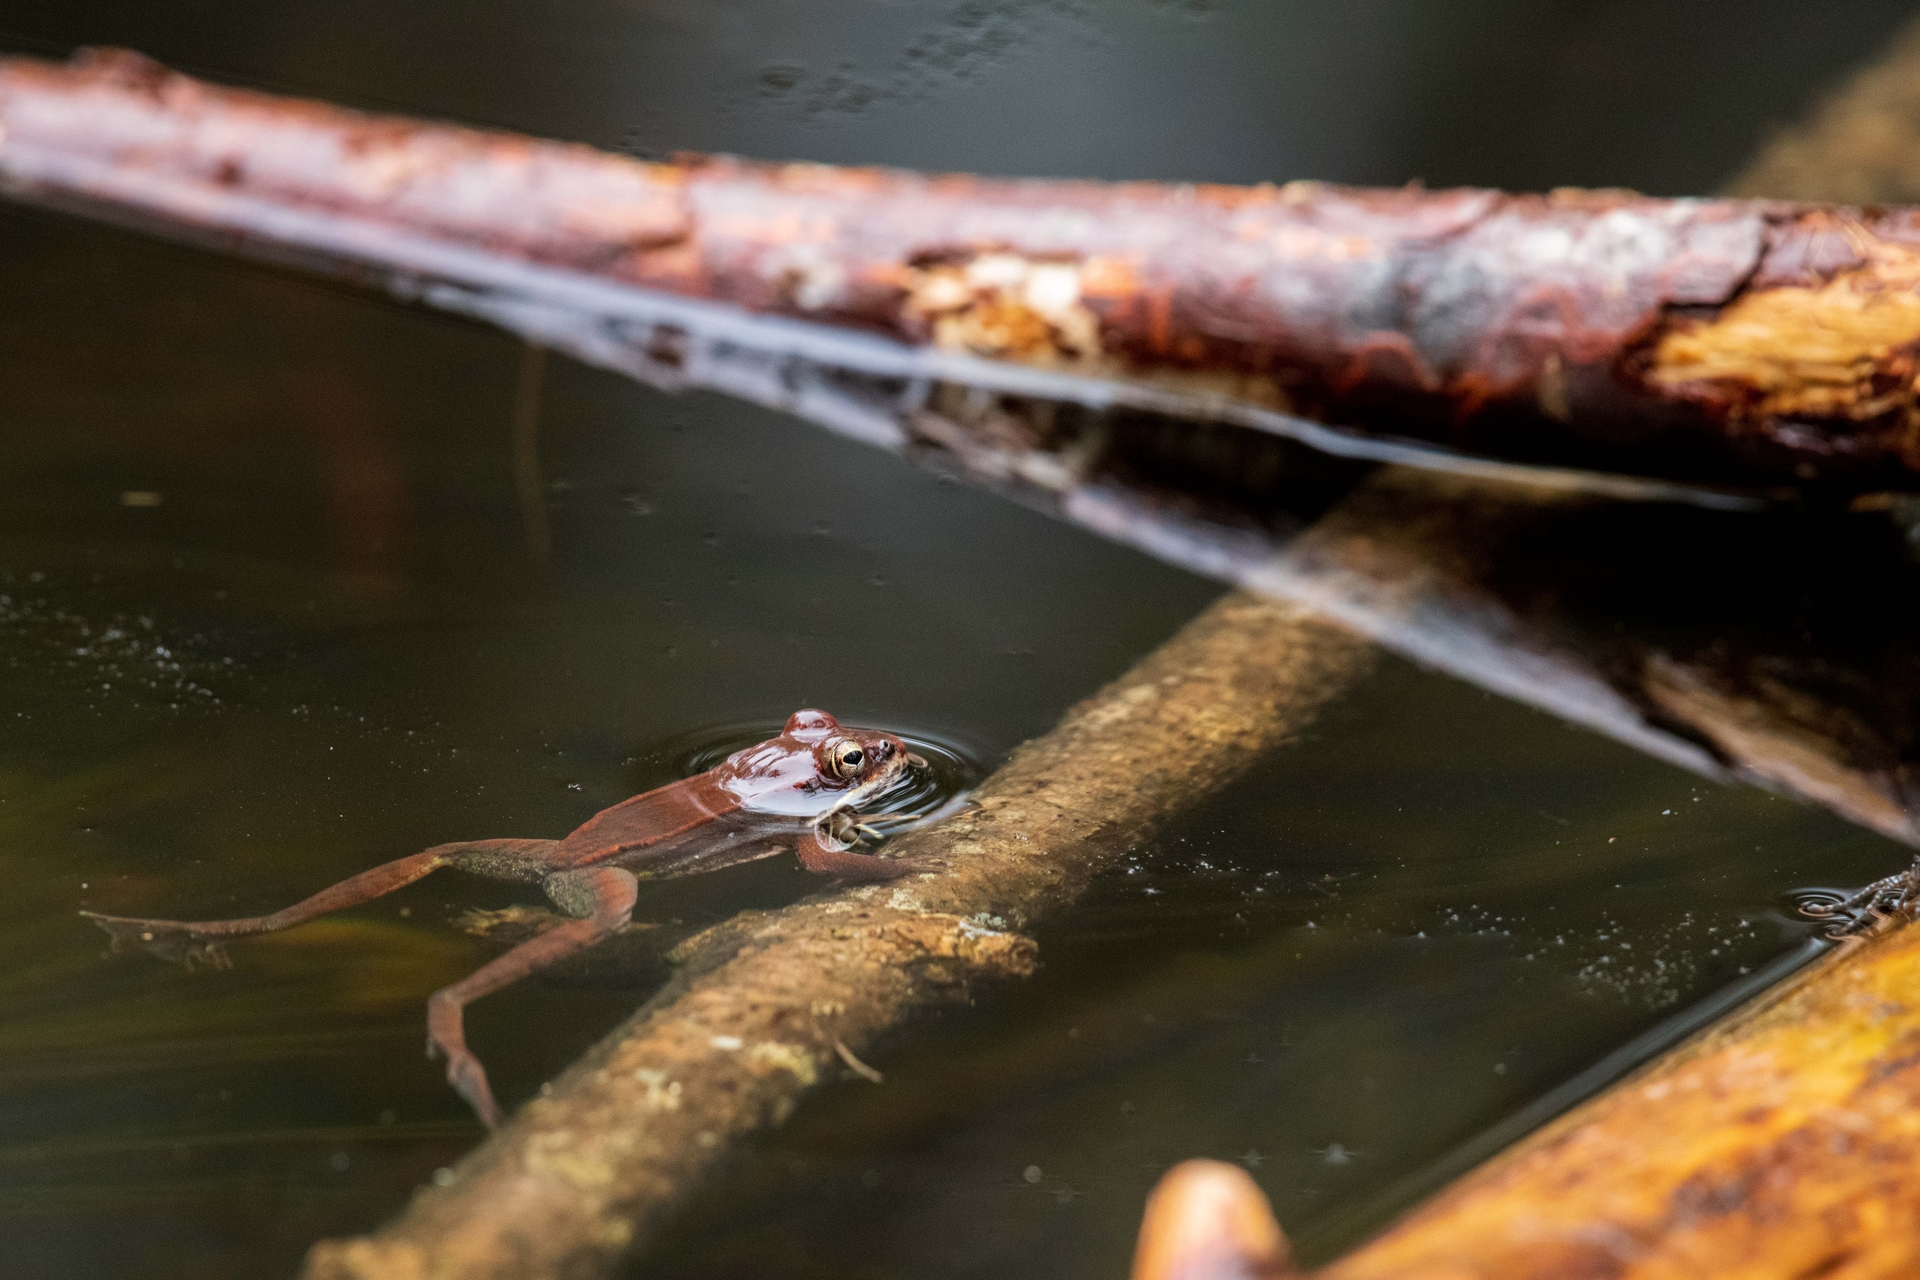 A brown frog with just it's head out of the water and front hands on a stick in the water.